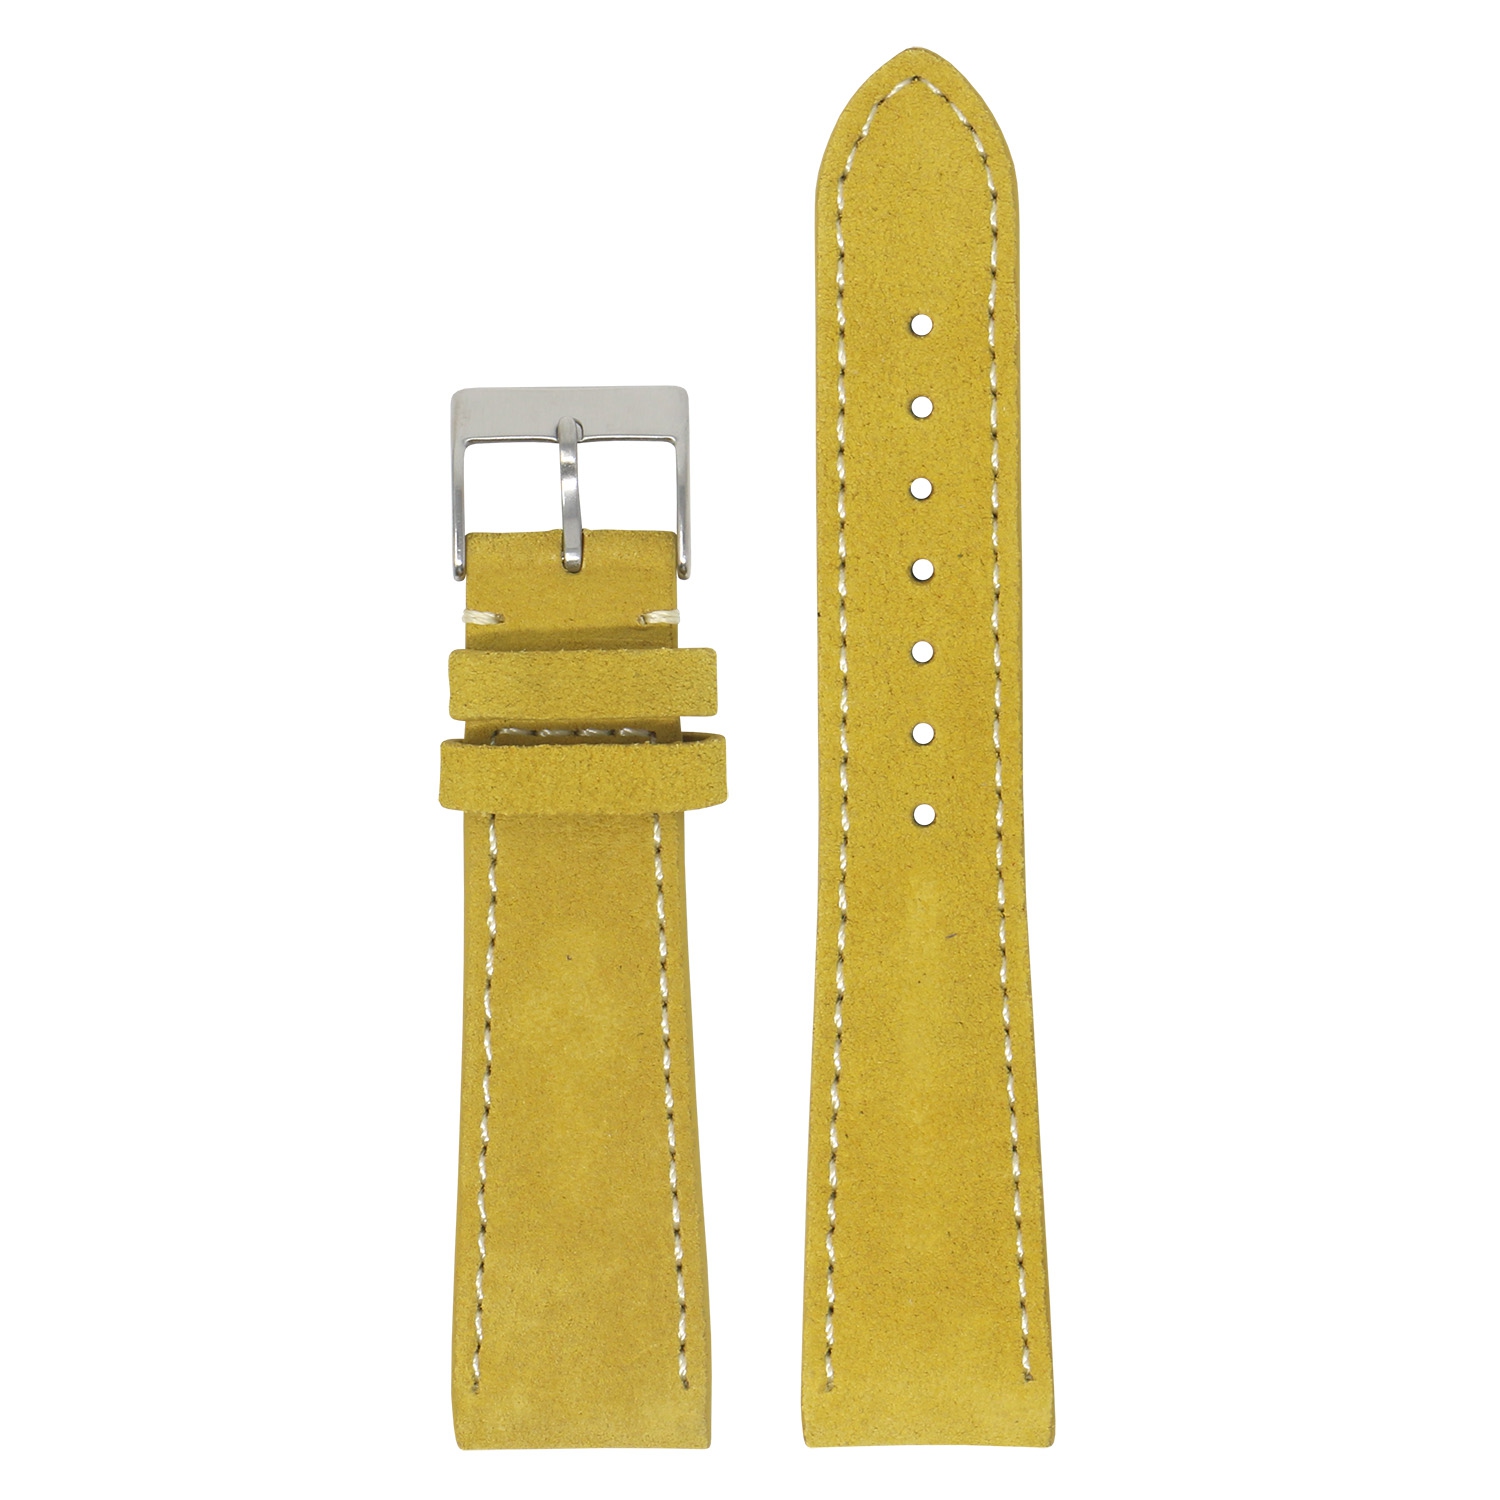 StrapsCo Classic Suede Watch Band Strap (Short, Standard, Long) for Fitbit Charge 4 & Charge 3 - Standard - Yellow